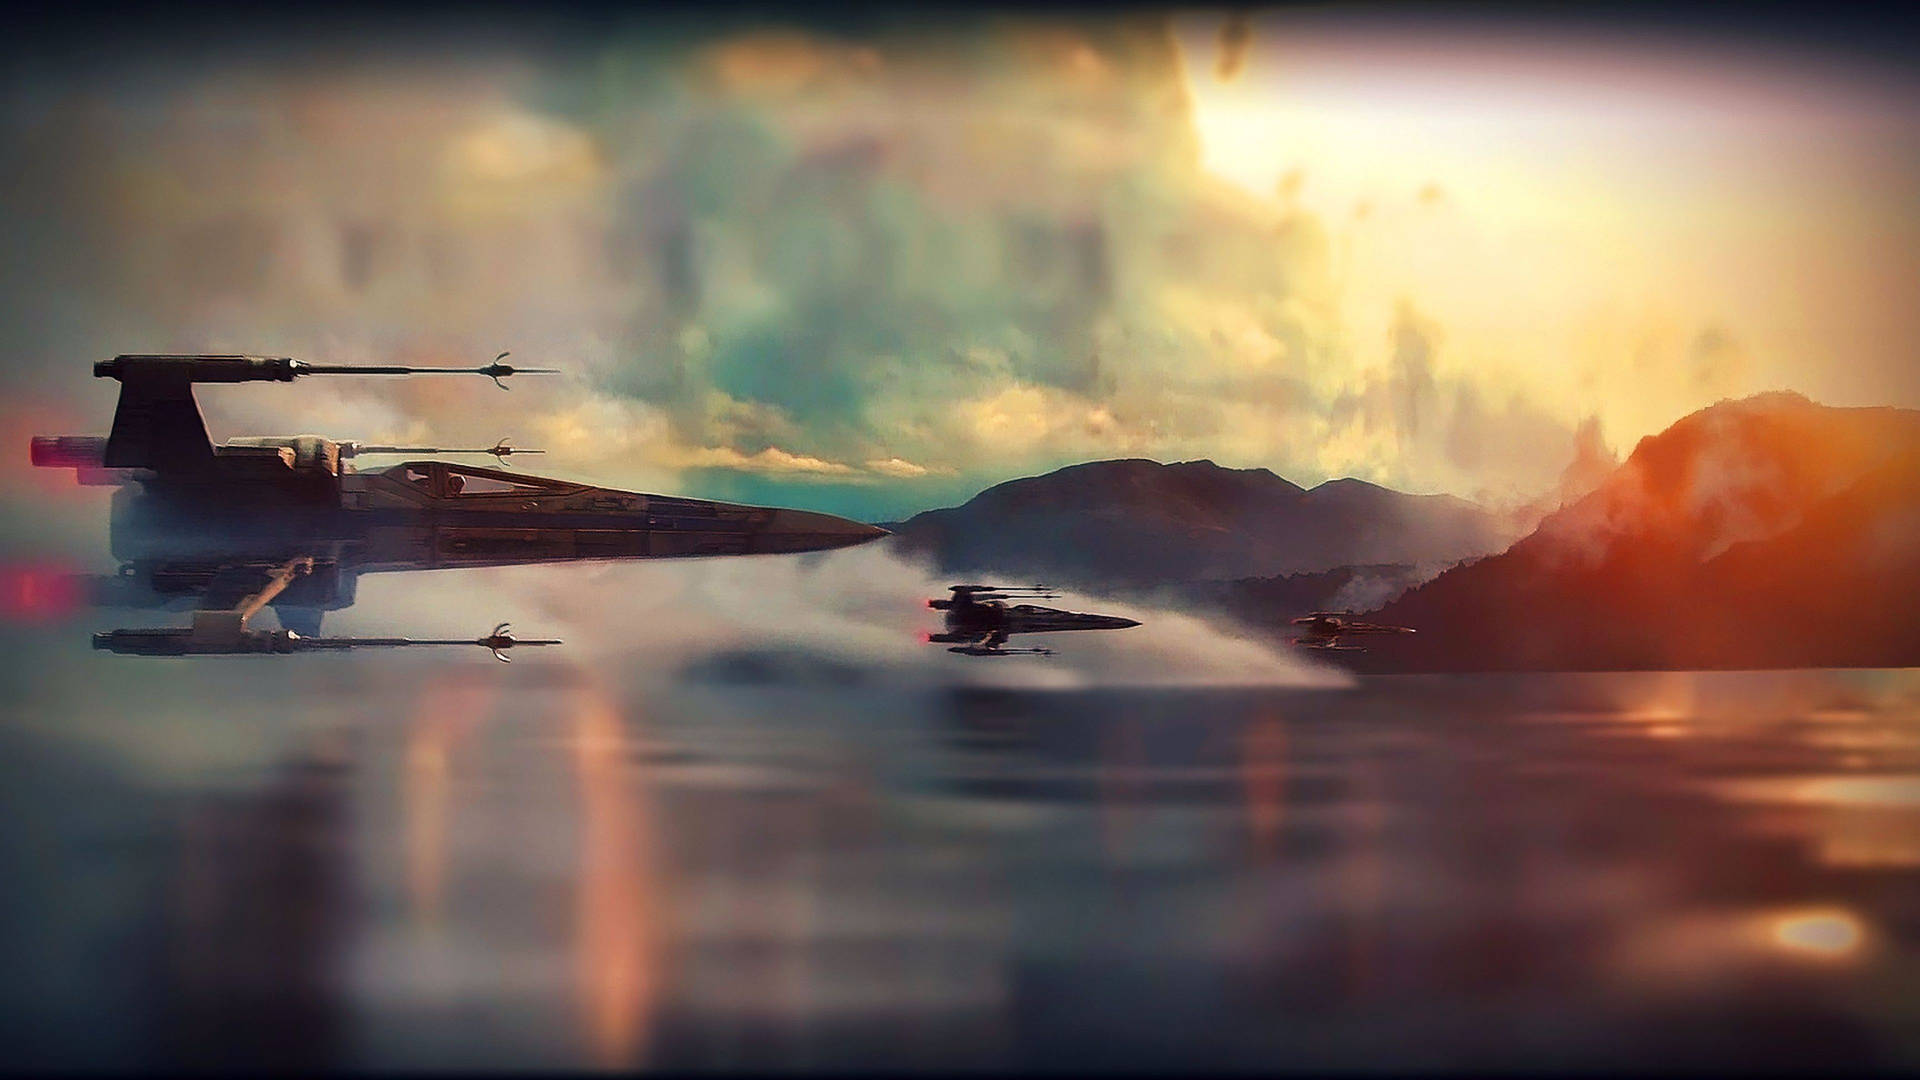 Star Wars Landscape With X-wing Starfighters Wallpaper